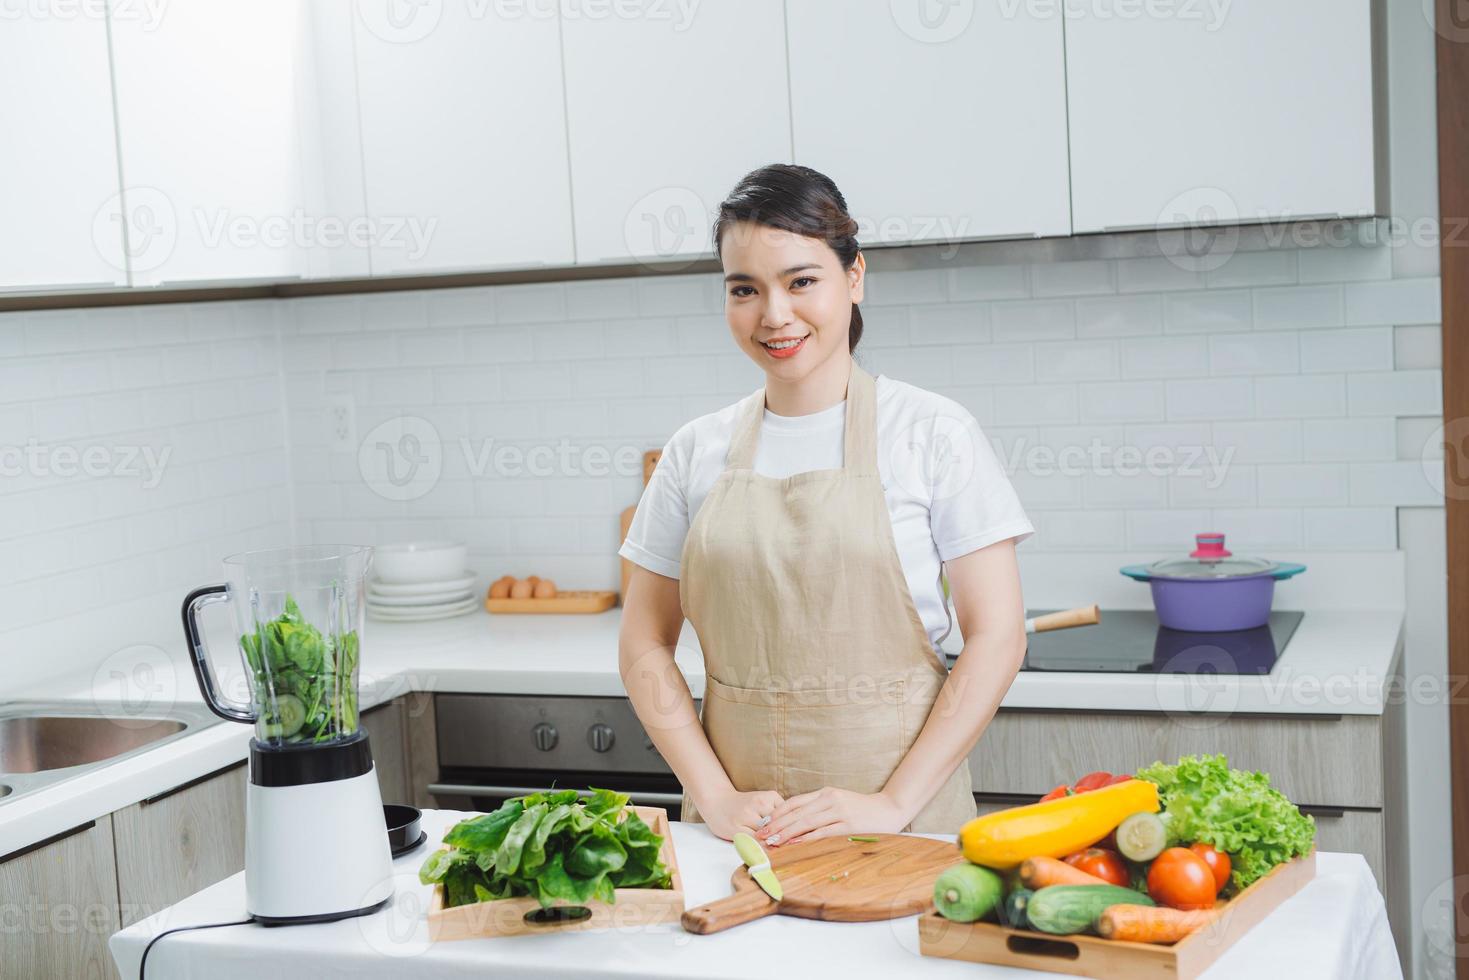 Woman cooking healthy detox smoothie with fresh fruits and green spinach, salad leaves. Lifestyle detox concept photo